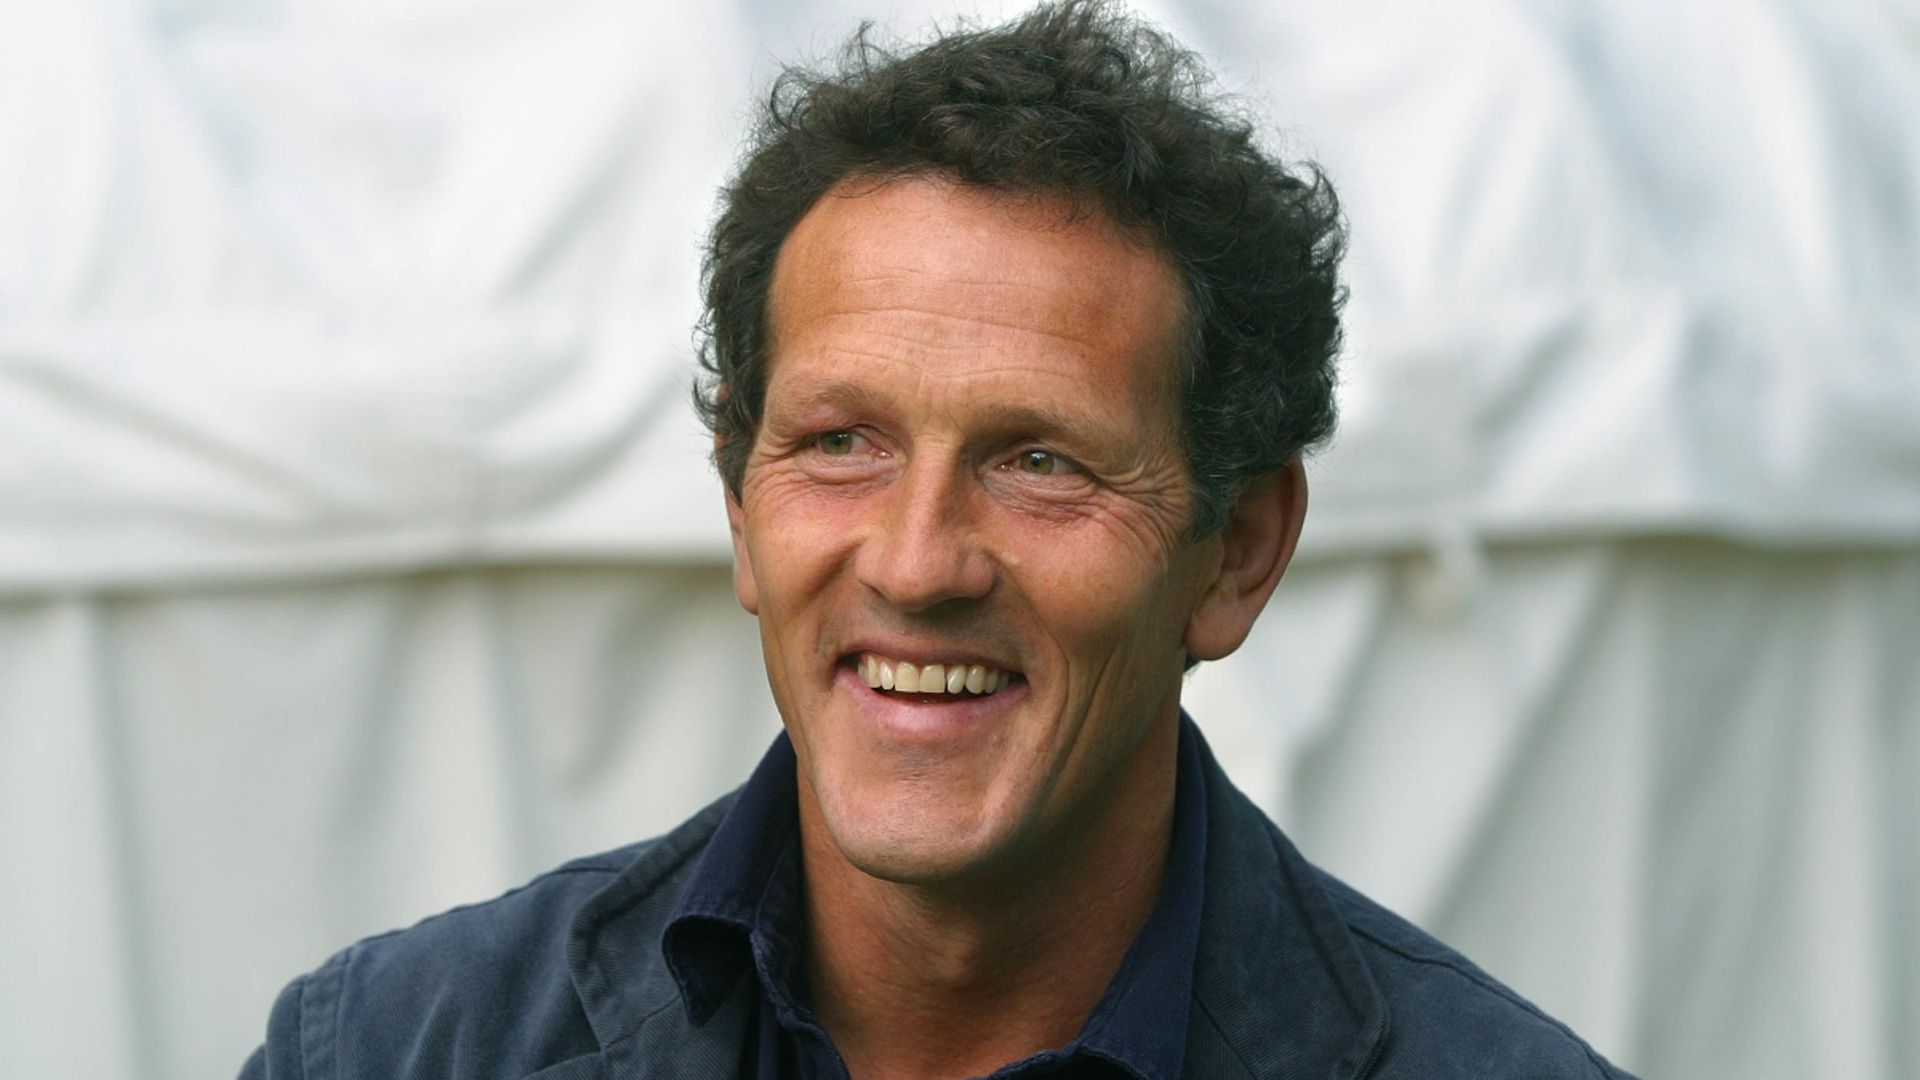 Monty Don responds to question about his retirement from TV career 